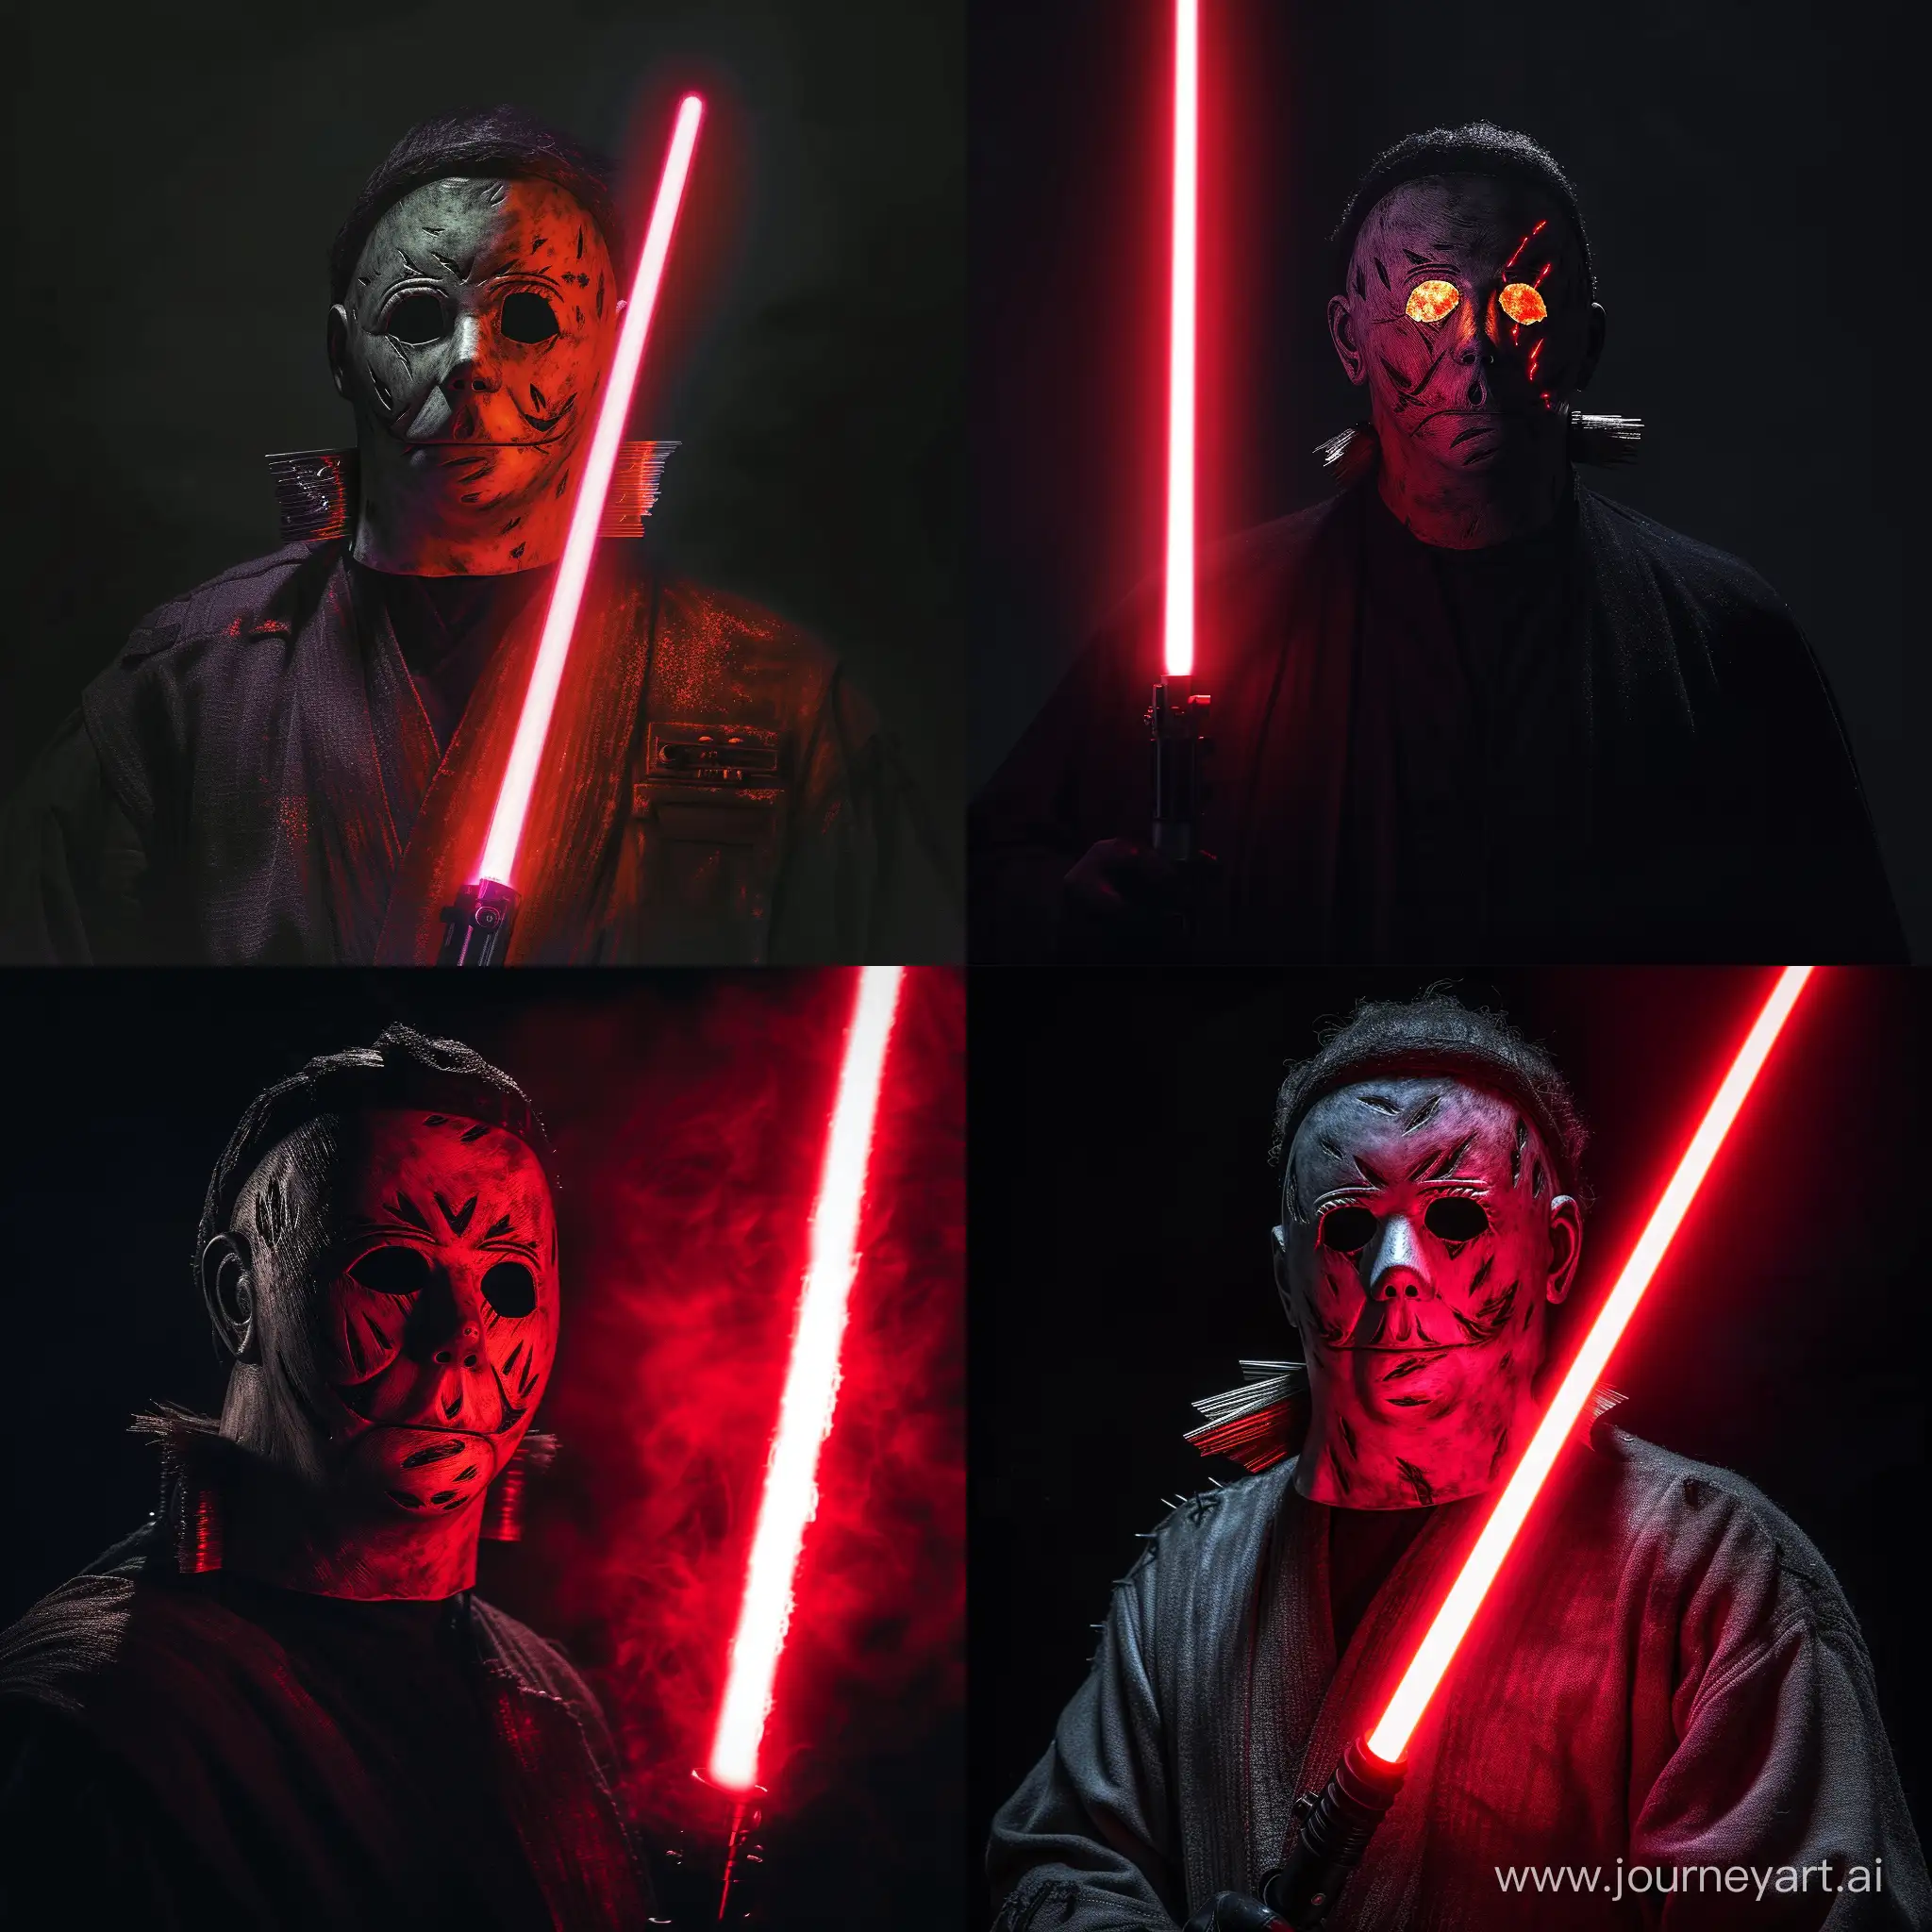 Michael Myers as a Sith Lord with the glow of his red lightsaber against his mask